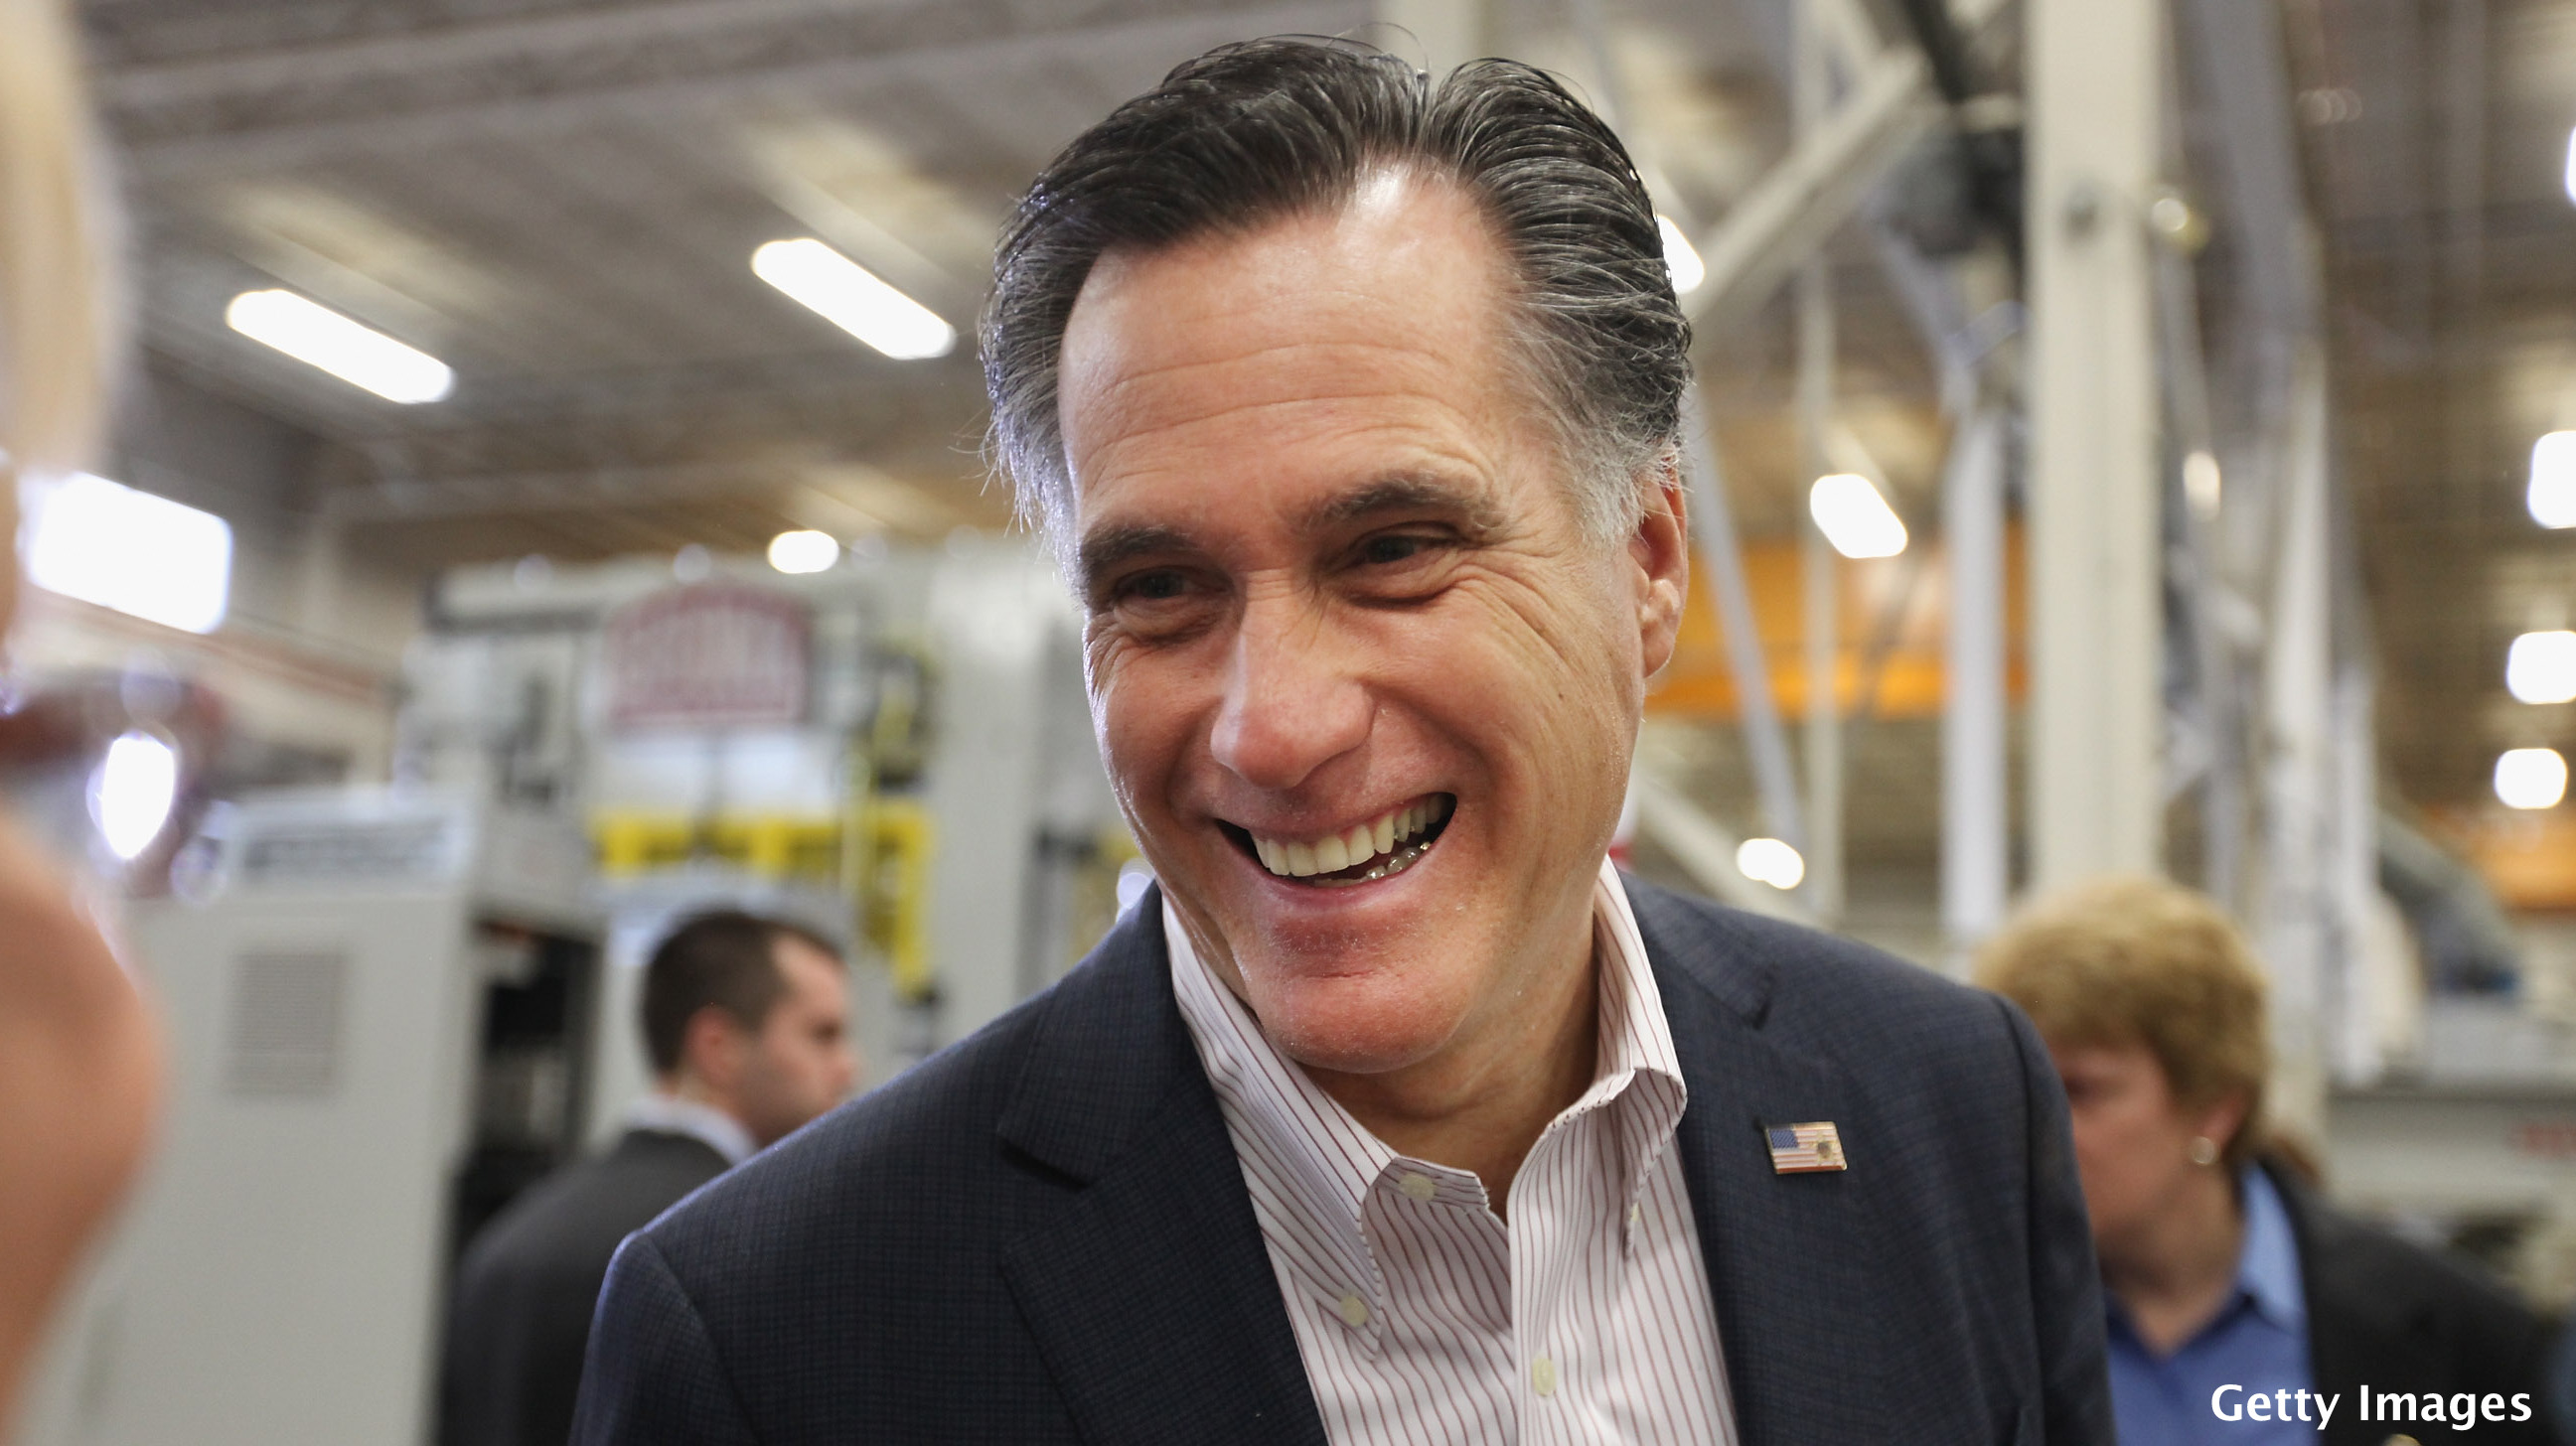 Romney smiles at Obama's 'judicial activism' charge